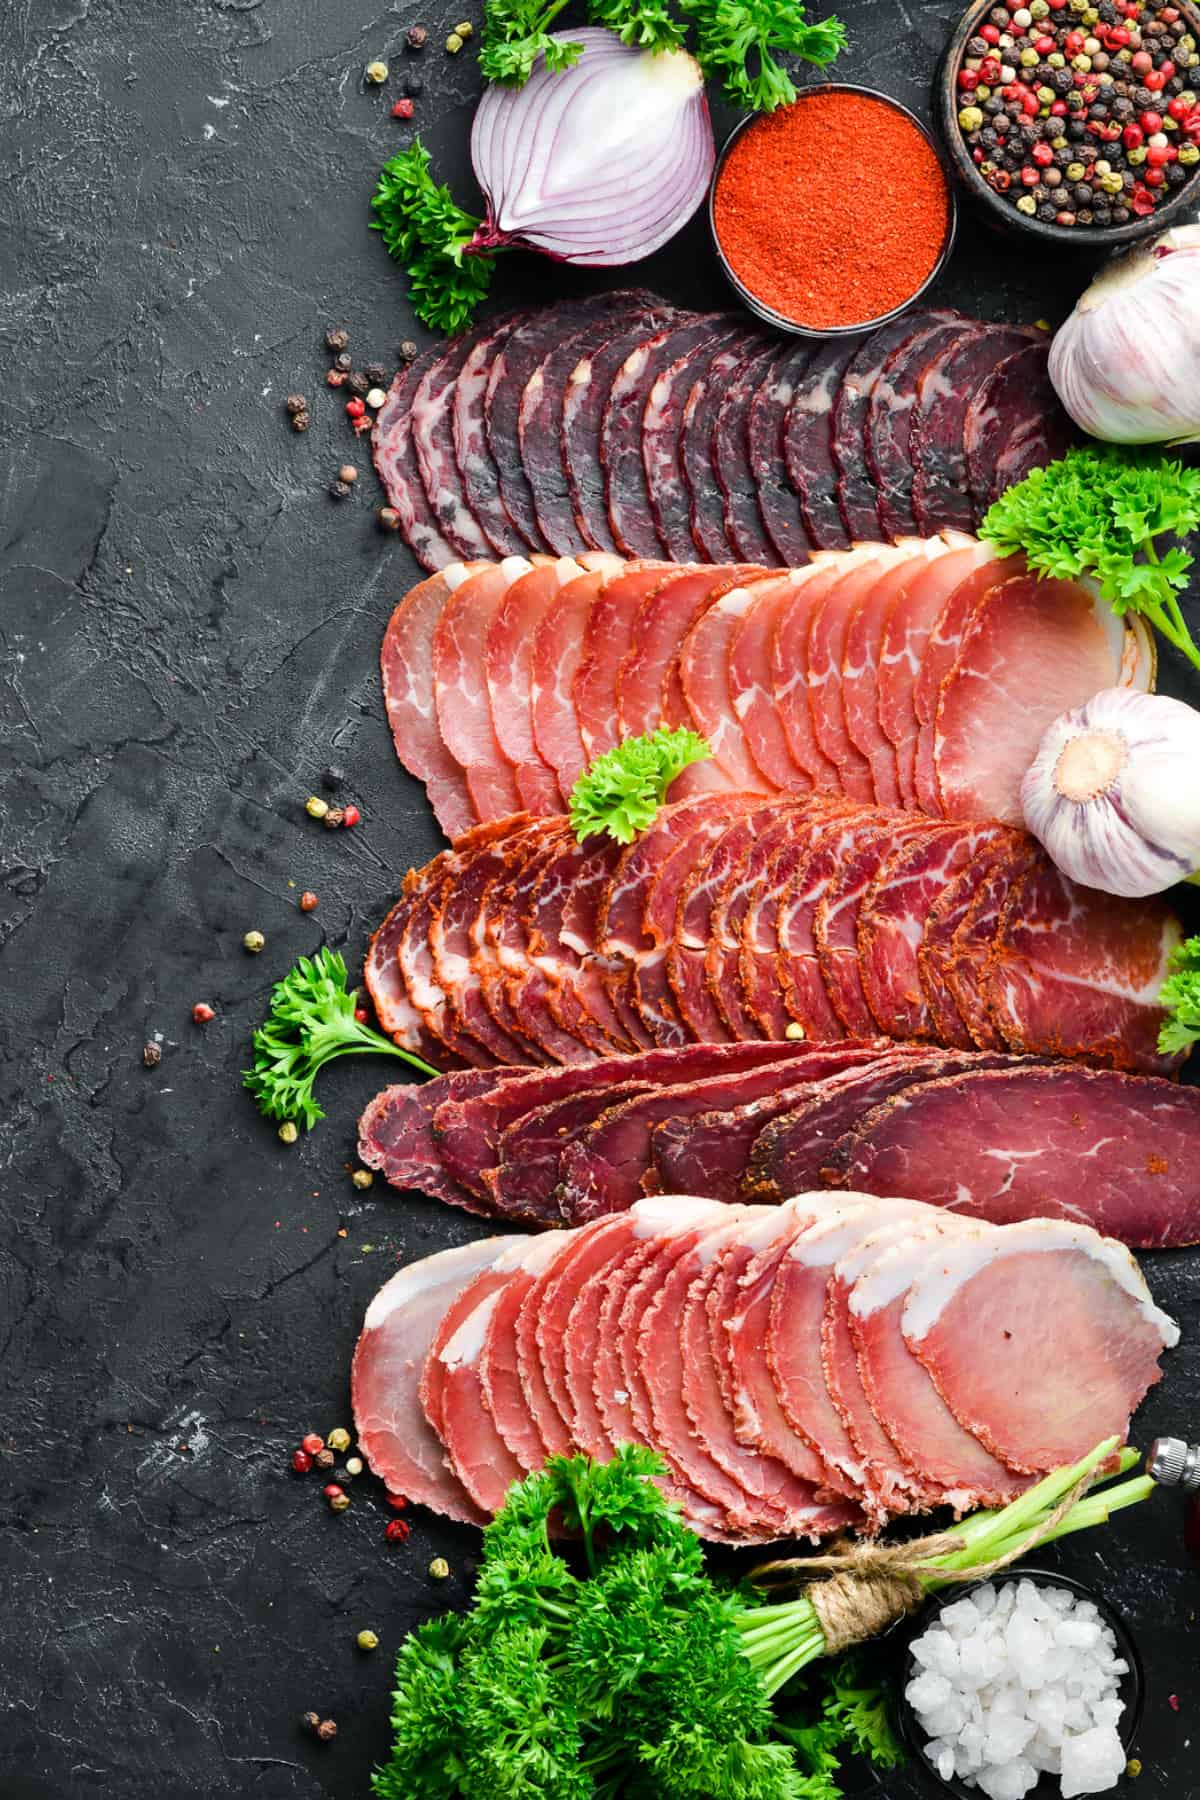 Variety of meats sliced and laid out on black slate